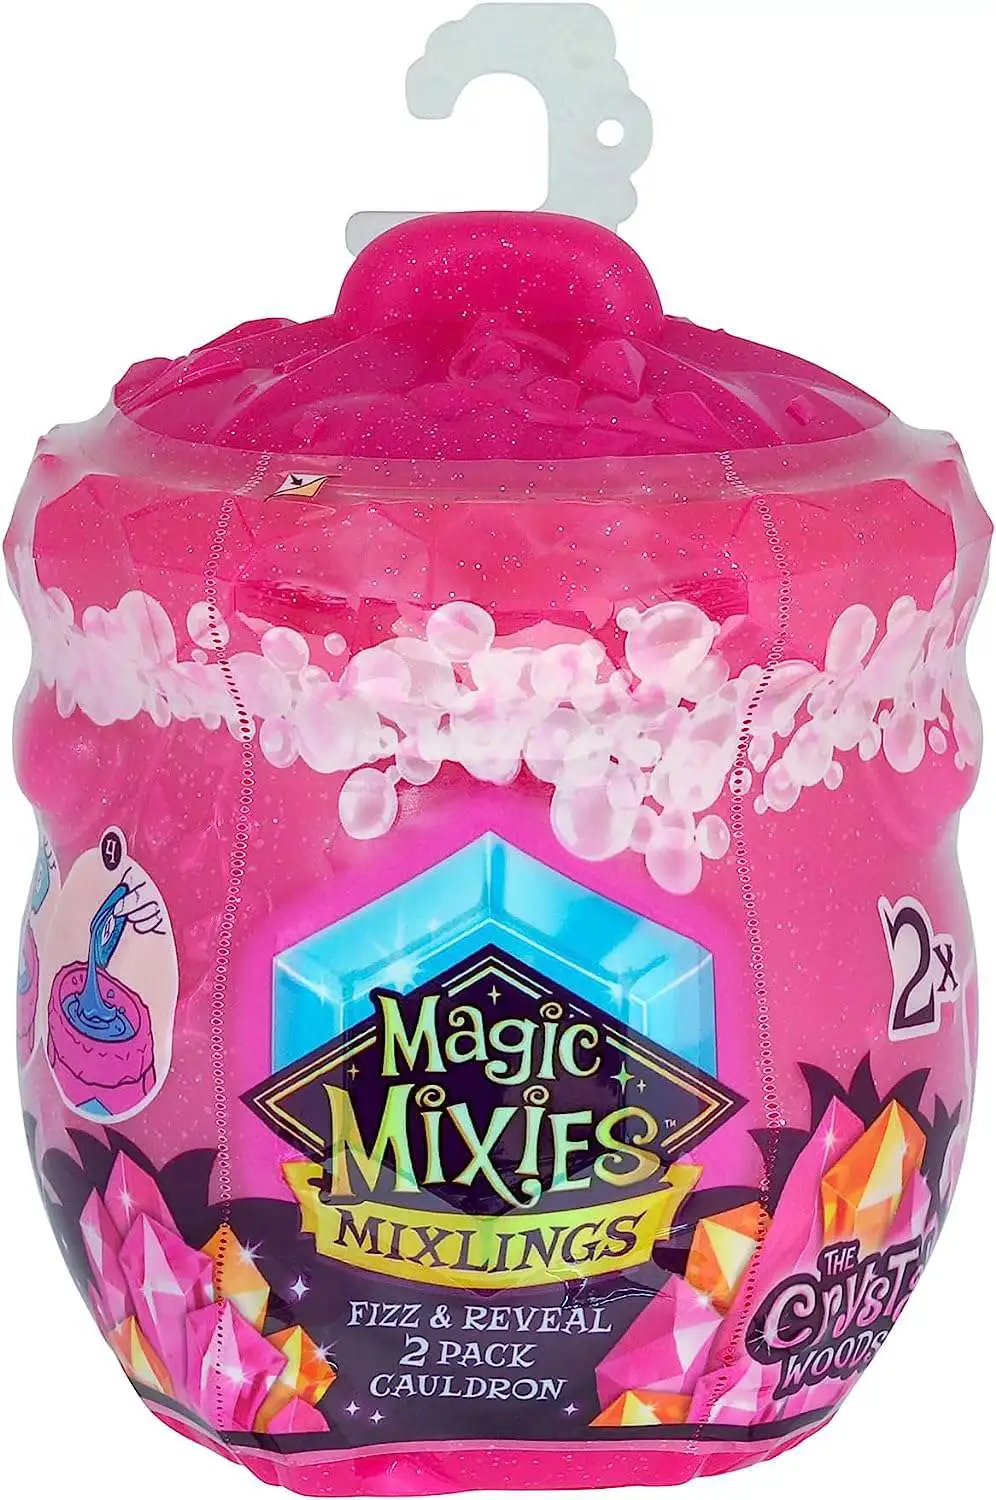 Magic Mixies Mixlings Series 3 The Crystal Woods Fizz Reveal